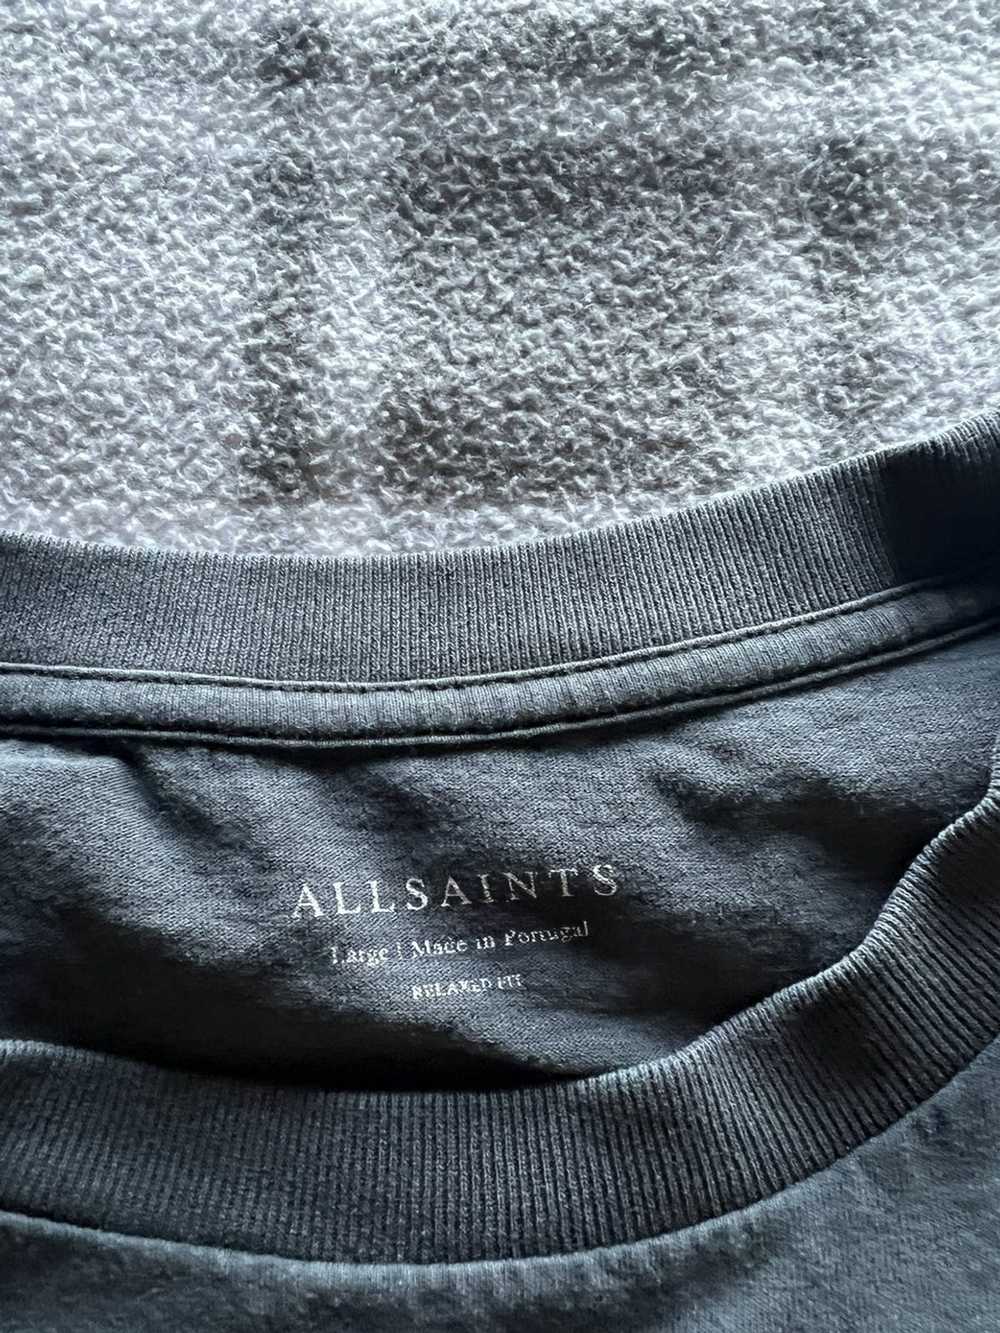 Allsaints Allsaints “Out of this world” Tee - image 4